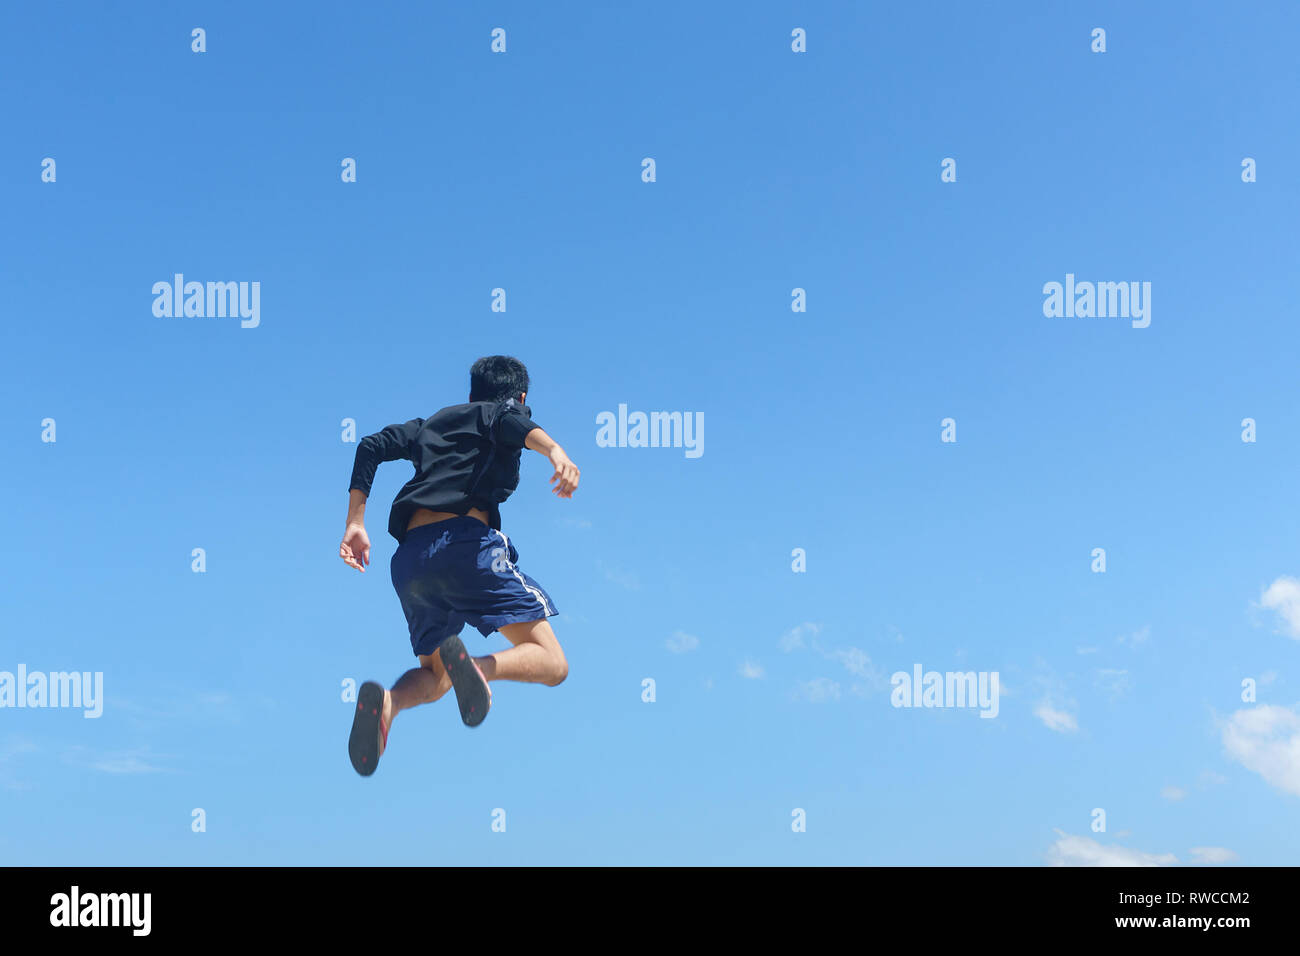 Young man jumping against blue sky landscape. Soft image with the young man is in motion where some blurry effect on his leg to show motion. Stock Photo